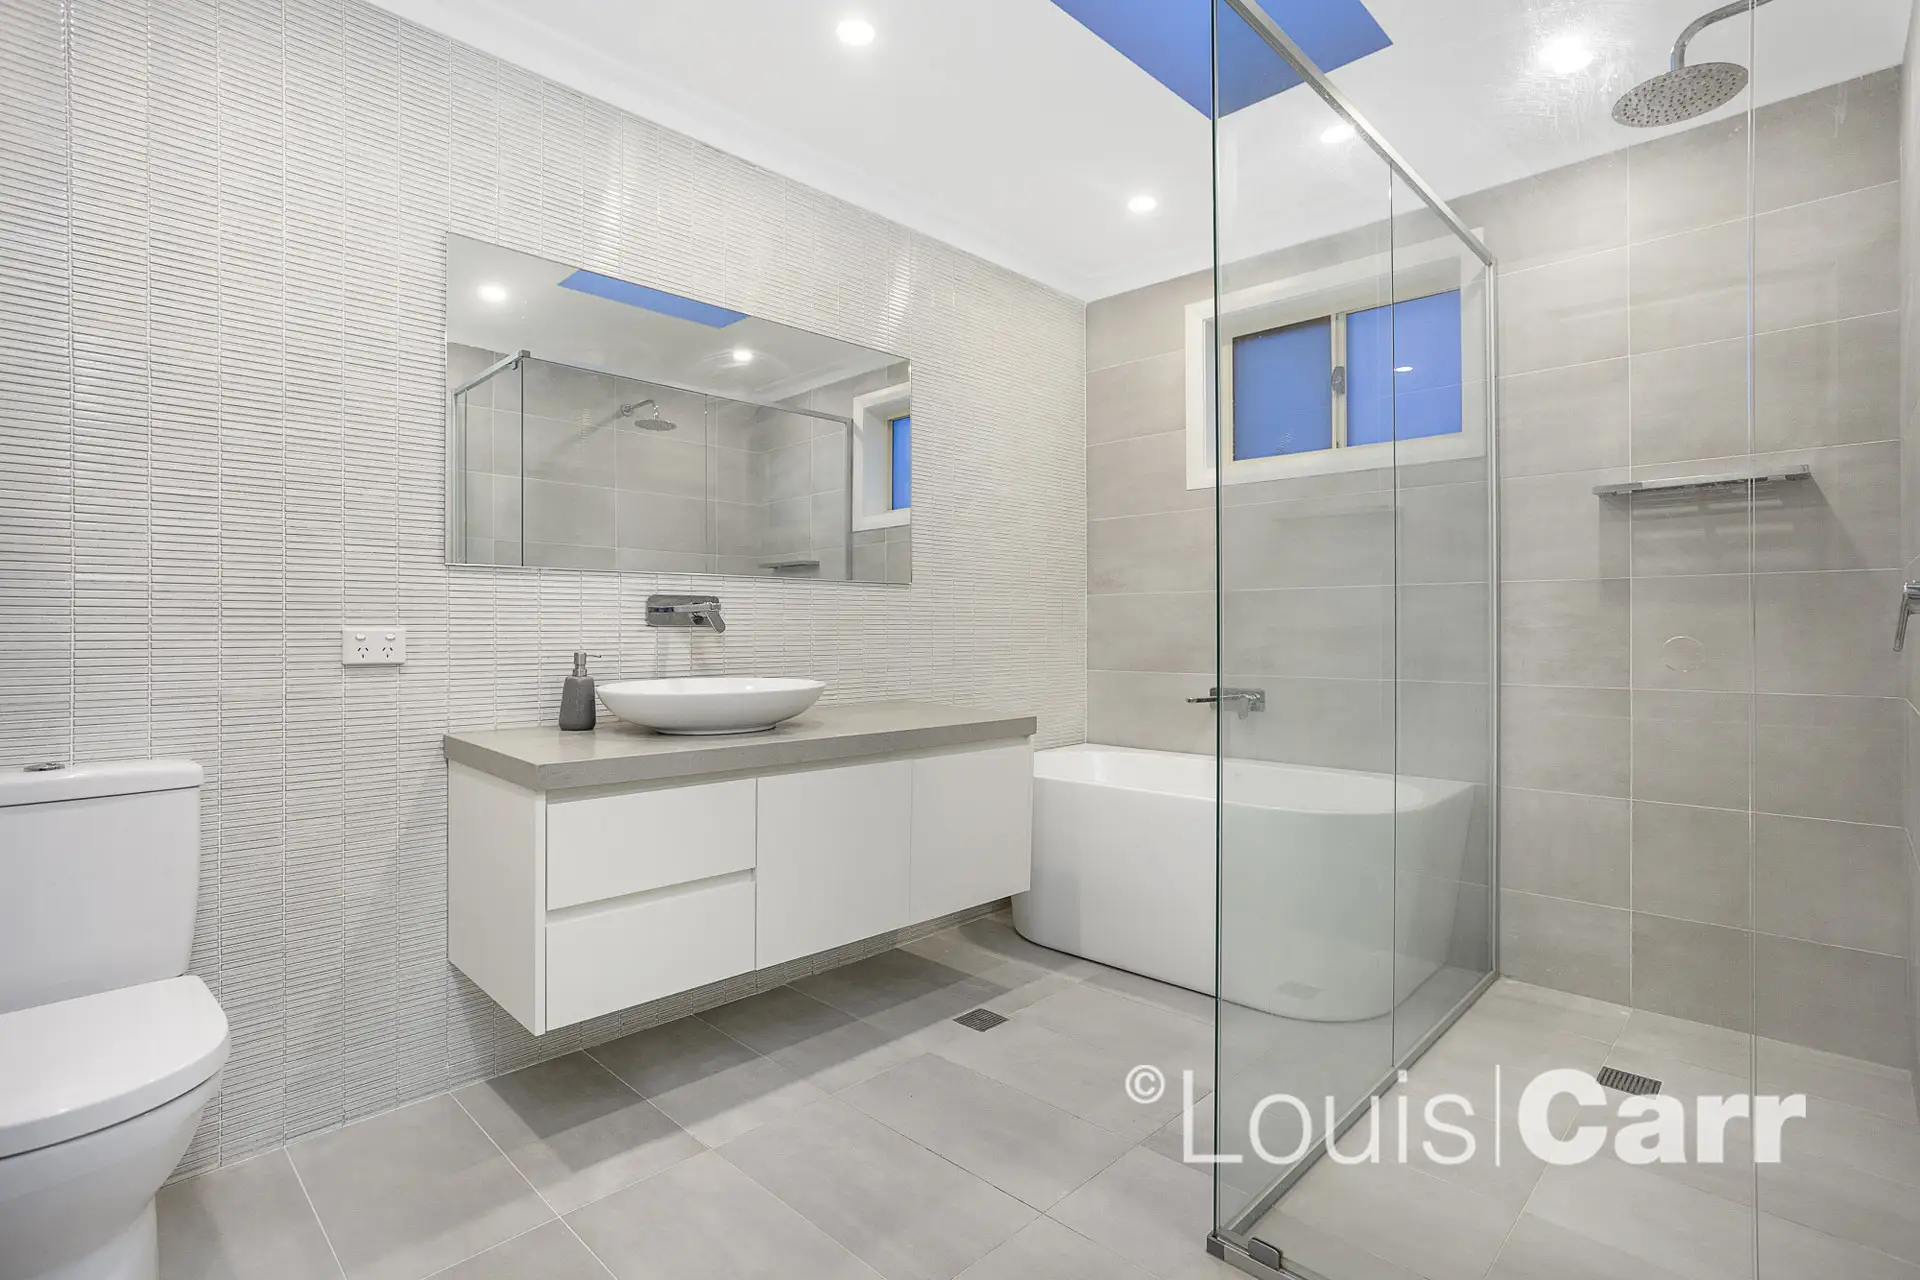 Photo #6: 5a Neptune Place, West Pennant Hills - Sold by Louis Carr Real Estate